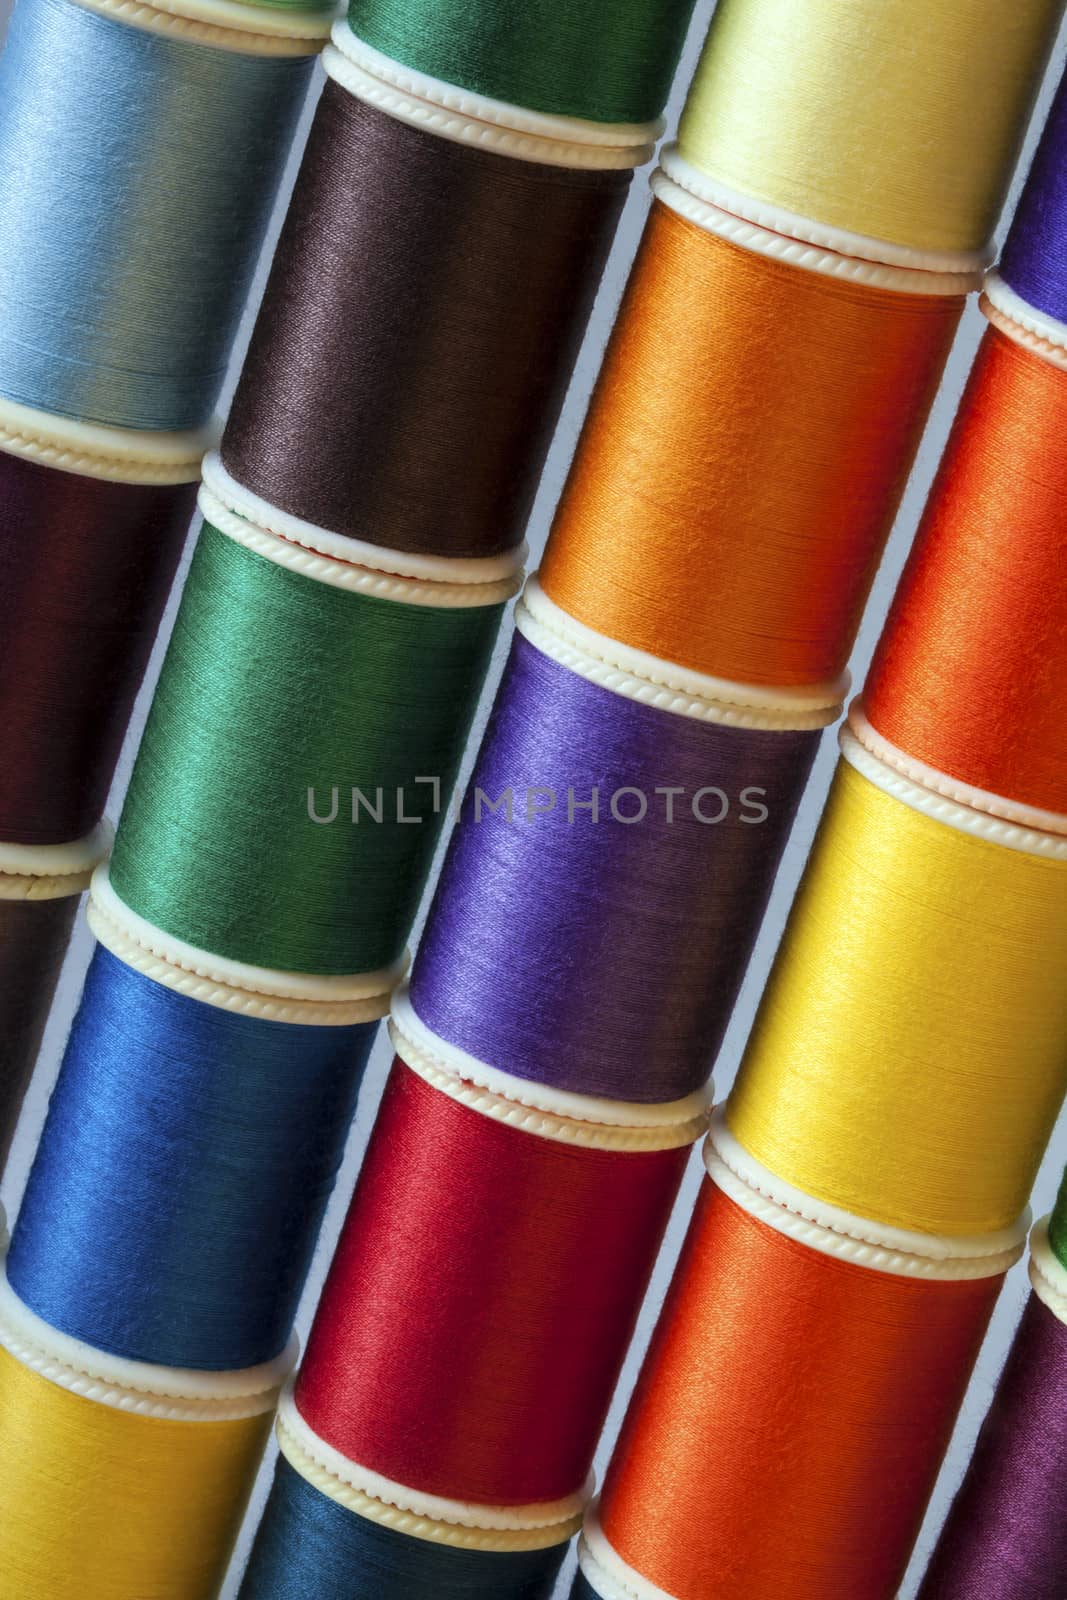 Range of colored sewing threads.